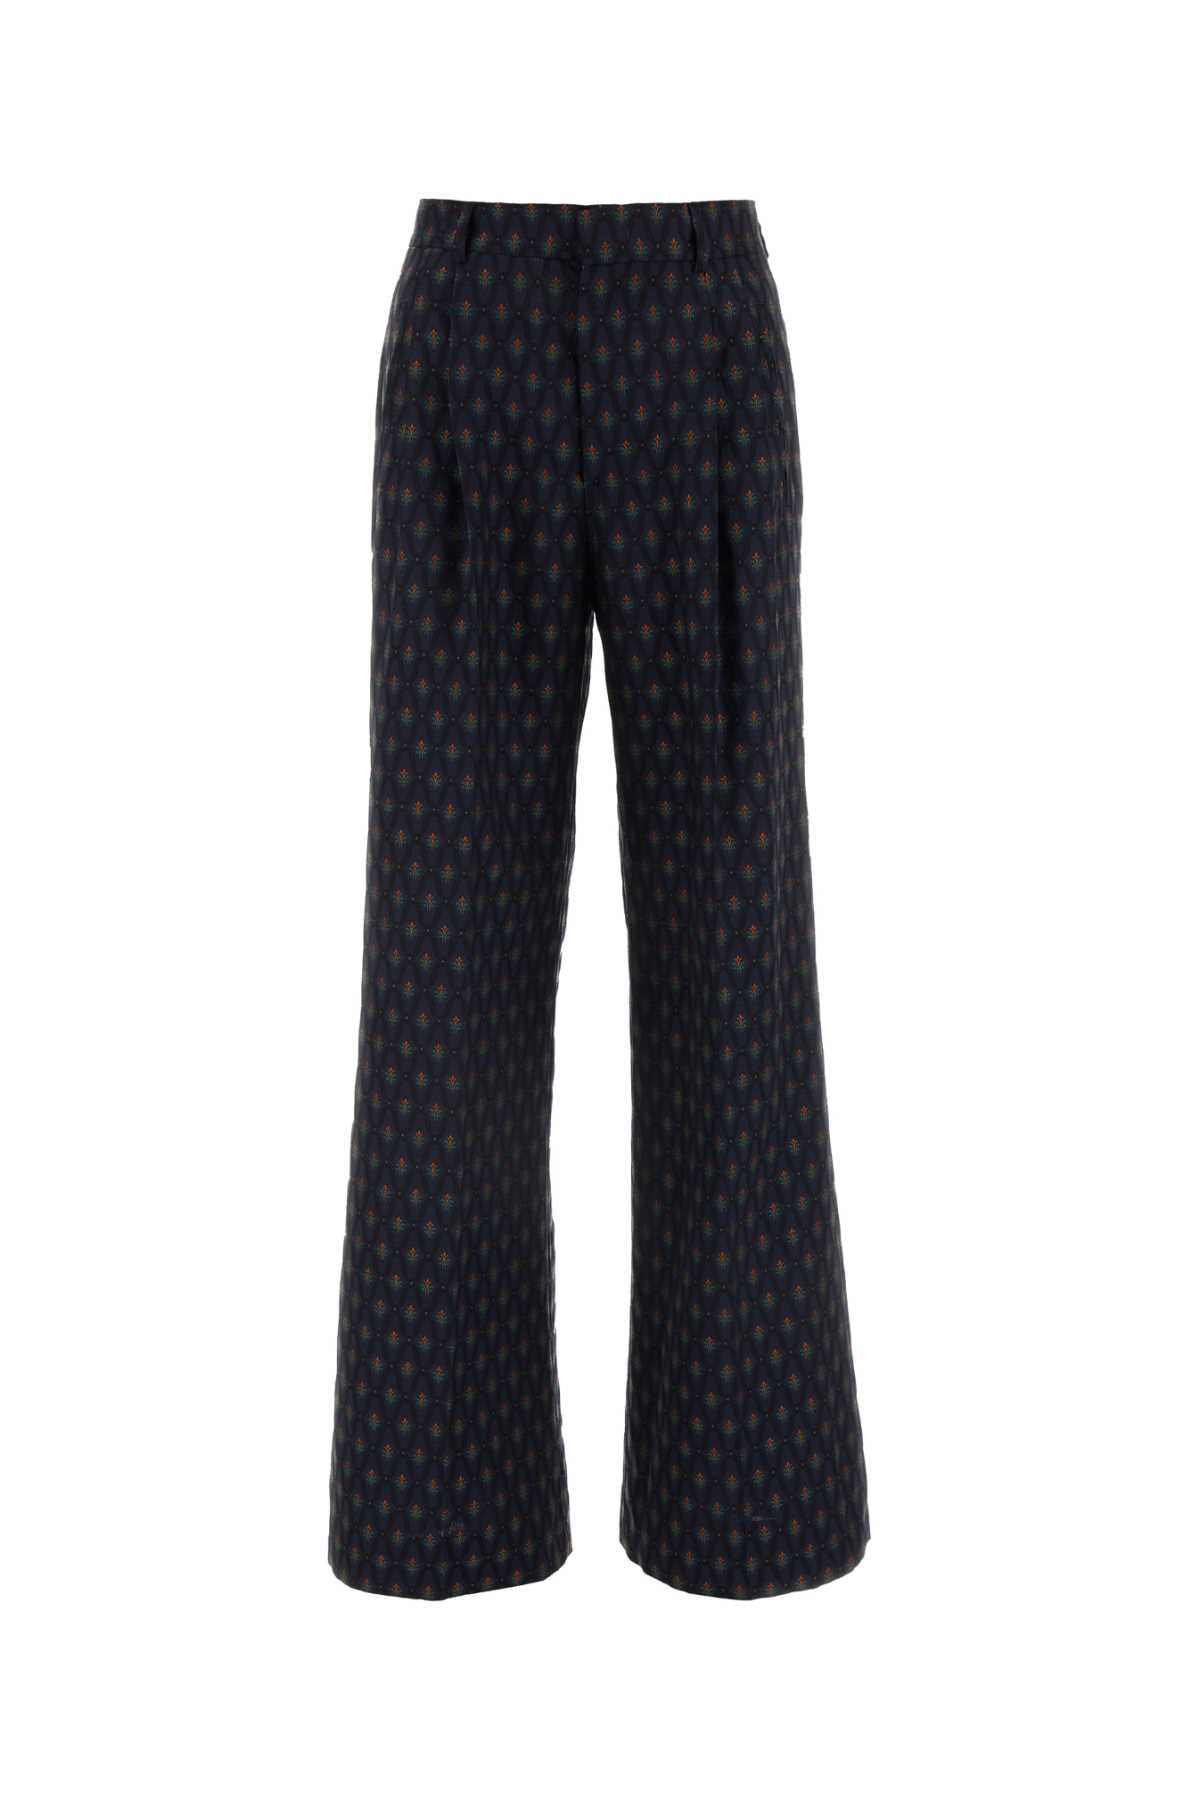 Etro Embroidered Wool Blend Pant In B0065